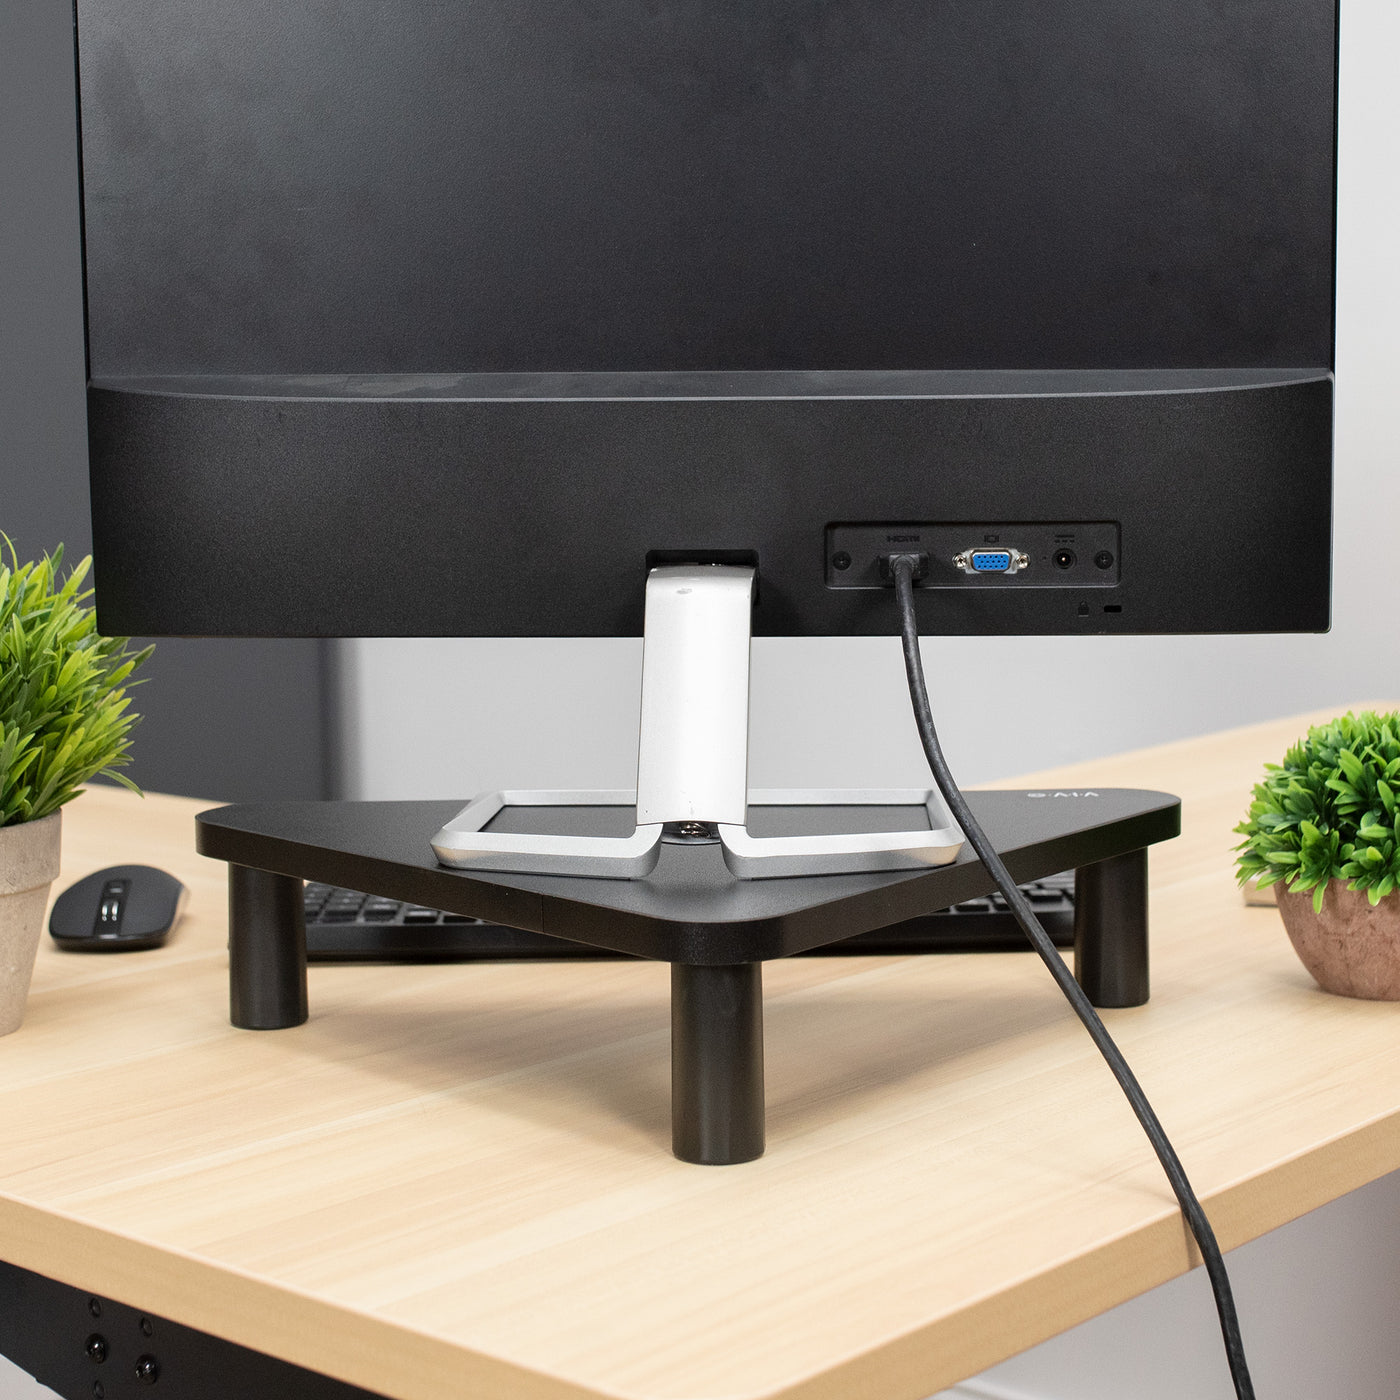 Sturdy corner tabletop monitor riser for comfortable viewing.